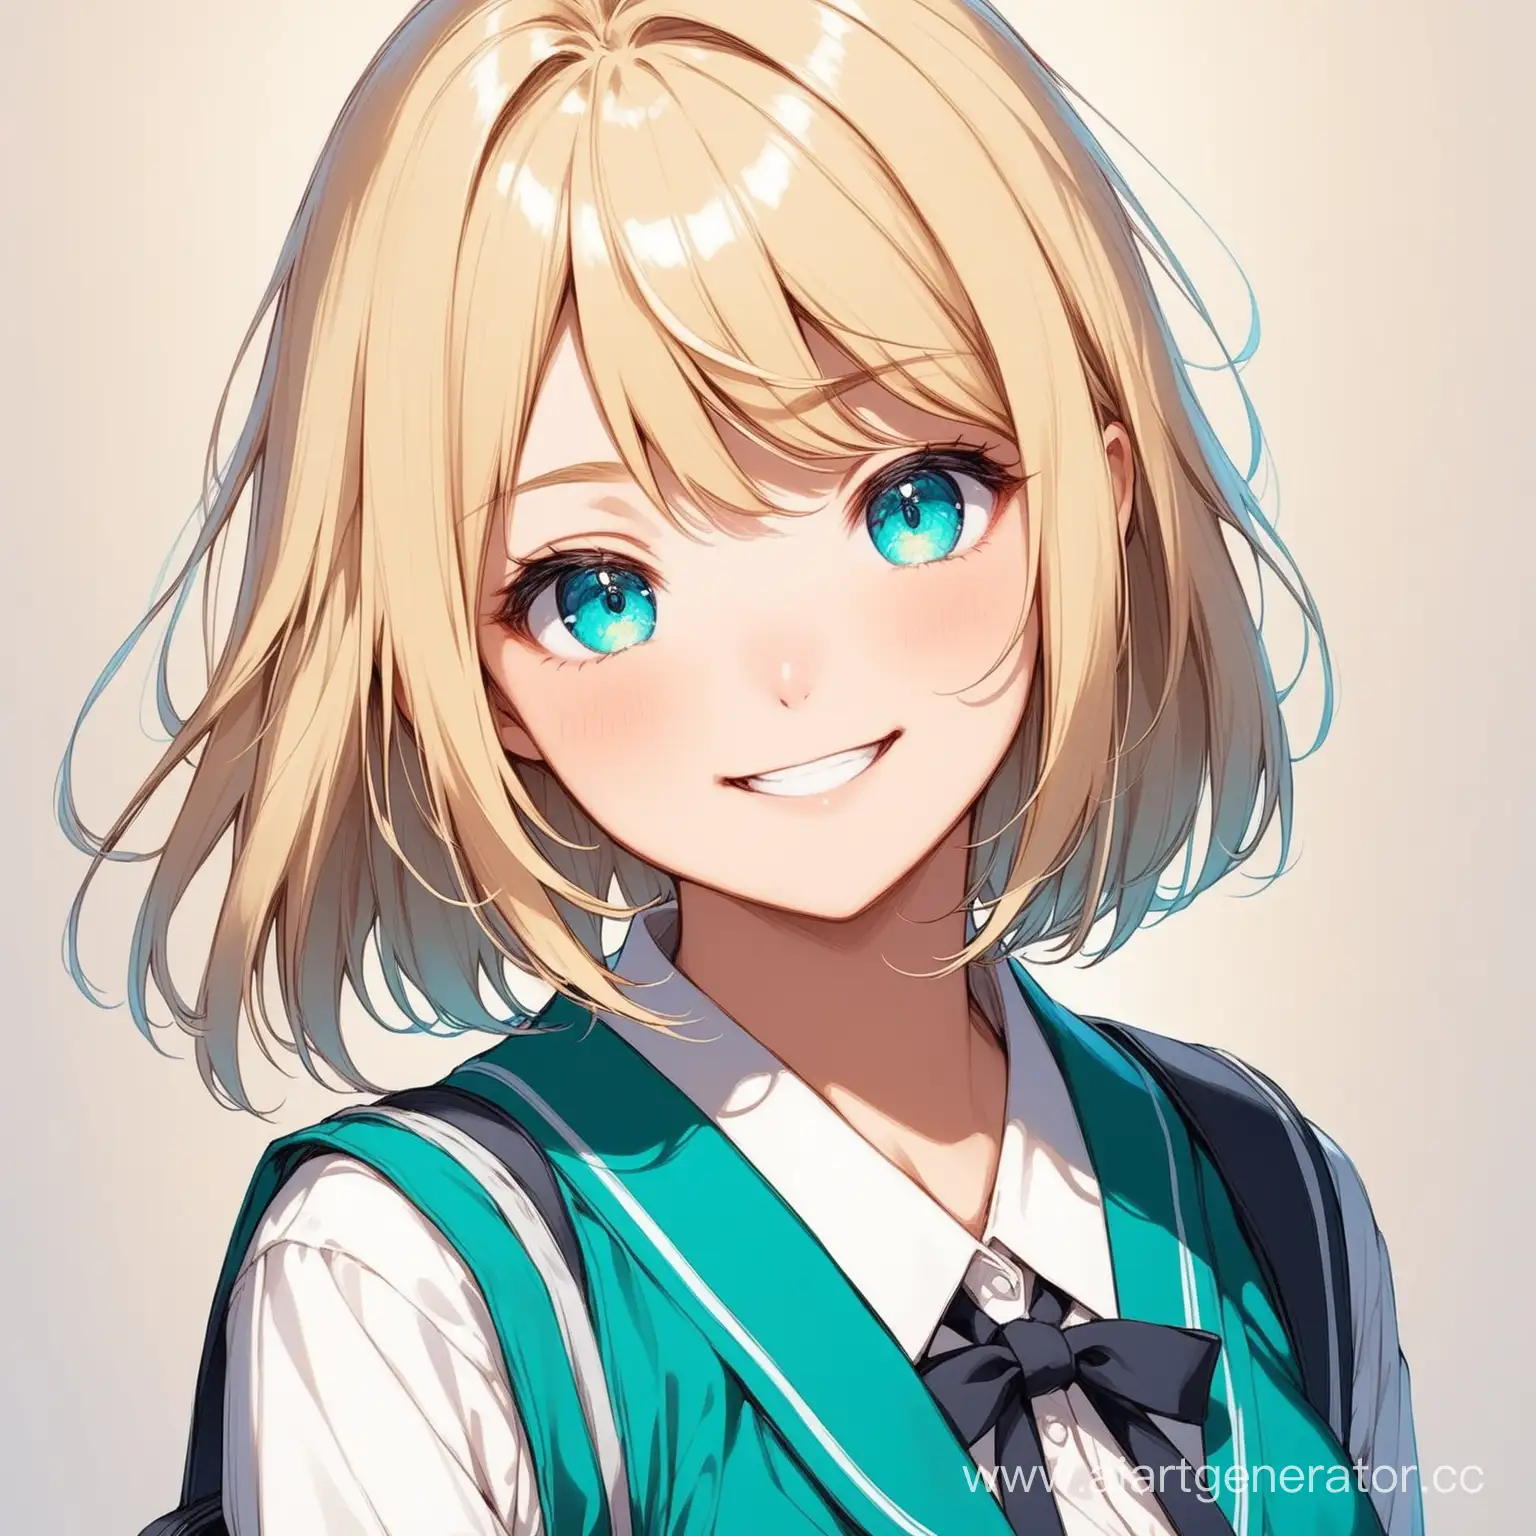 Cheerful-Schoolgirl-with-Blonde-Bob-and-Turquoise-Eyes-in-Japanese-Uniform